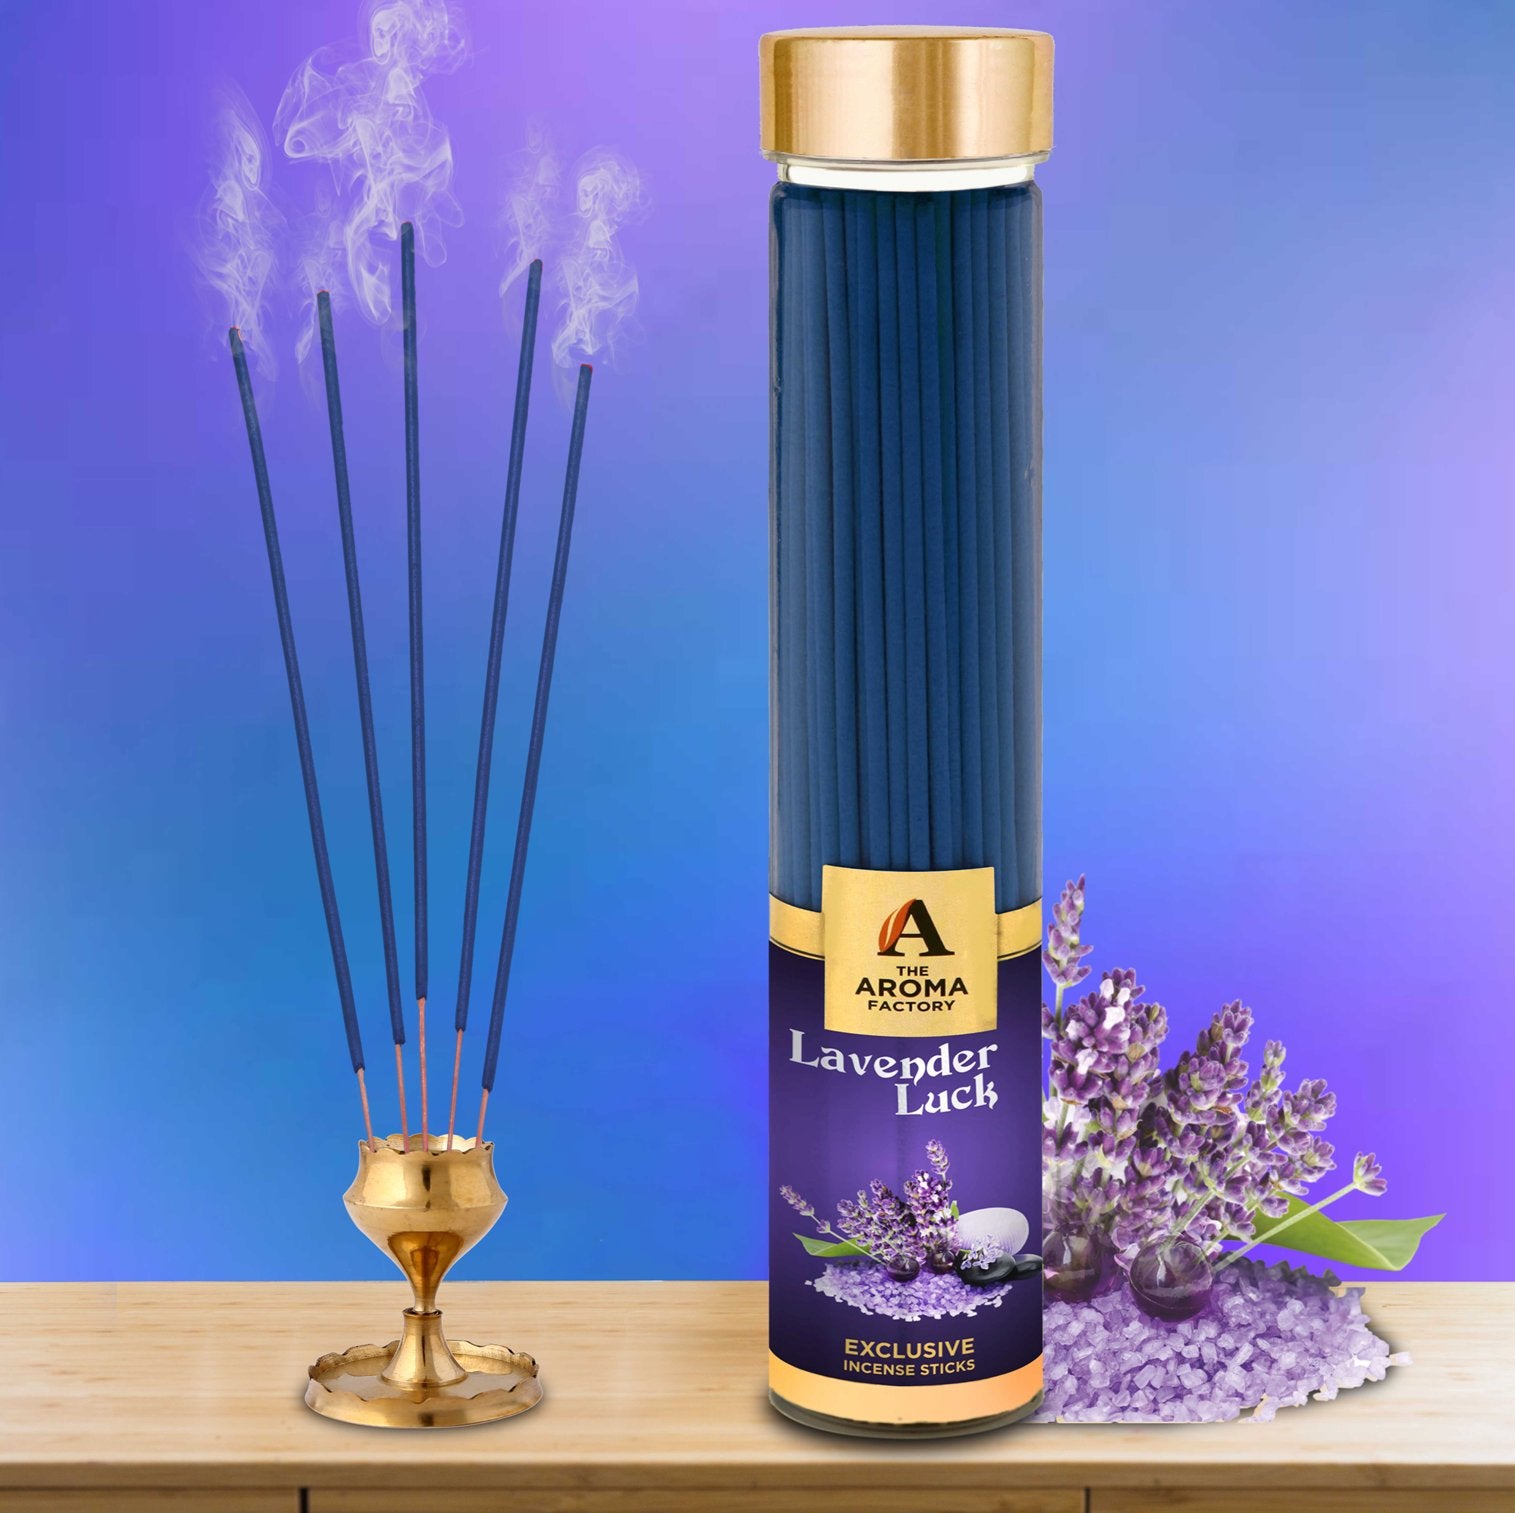 The Aroma Factory Lavender Luck Incense Sticks Agarbatti (Charcoal Free & 100% Herbal) Bottle, 100g